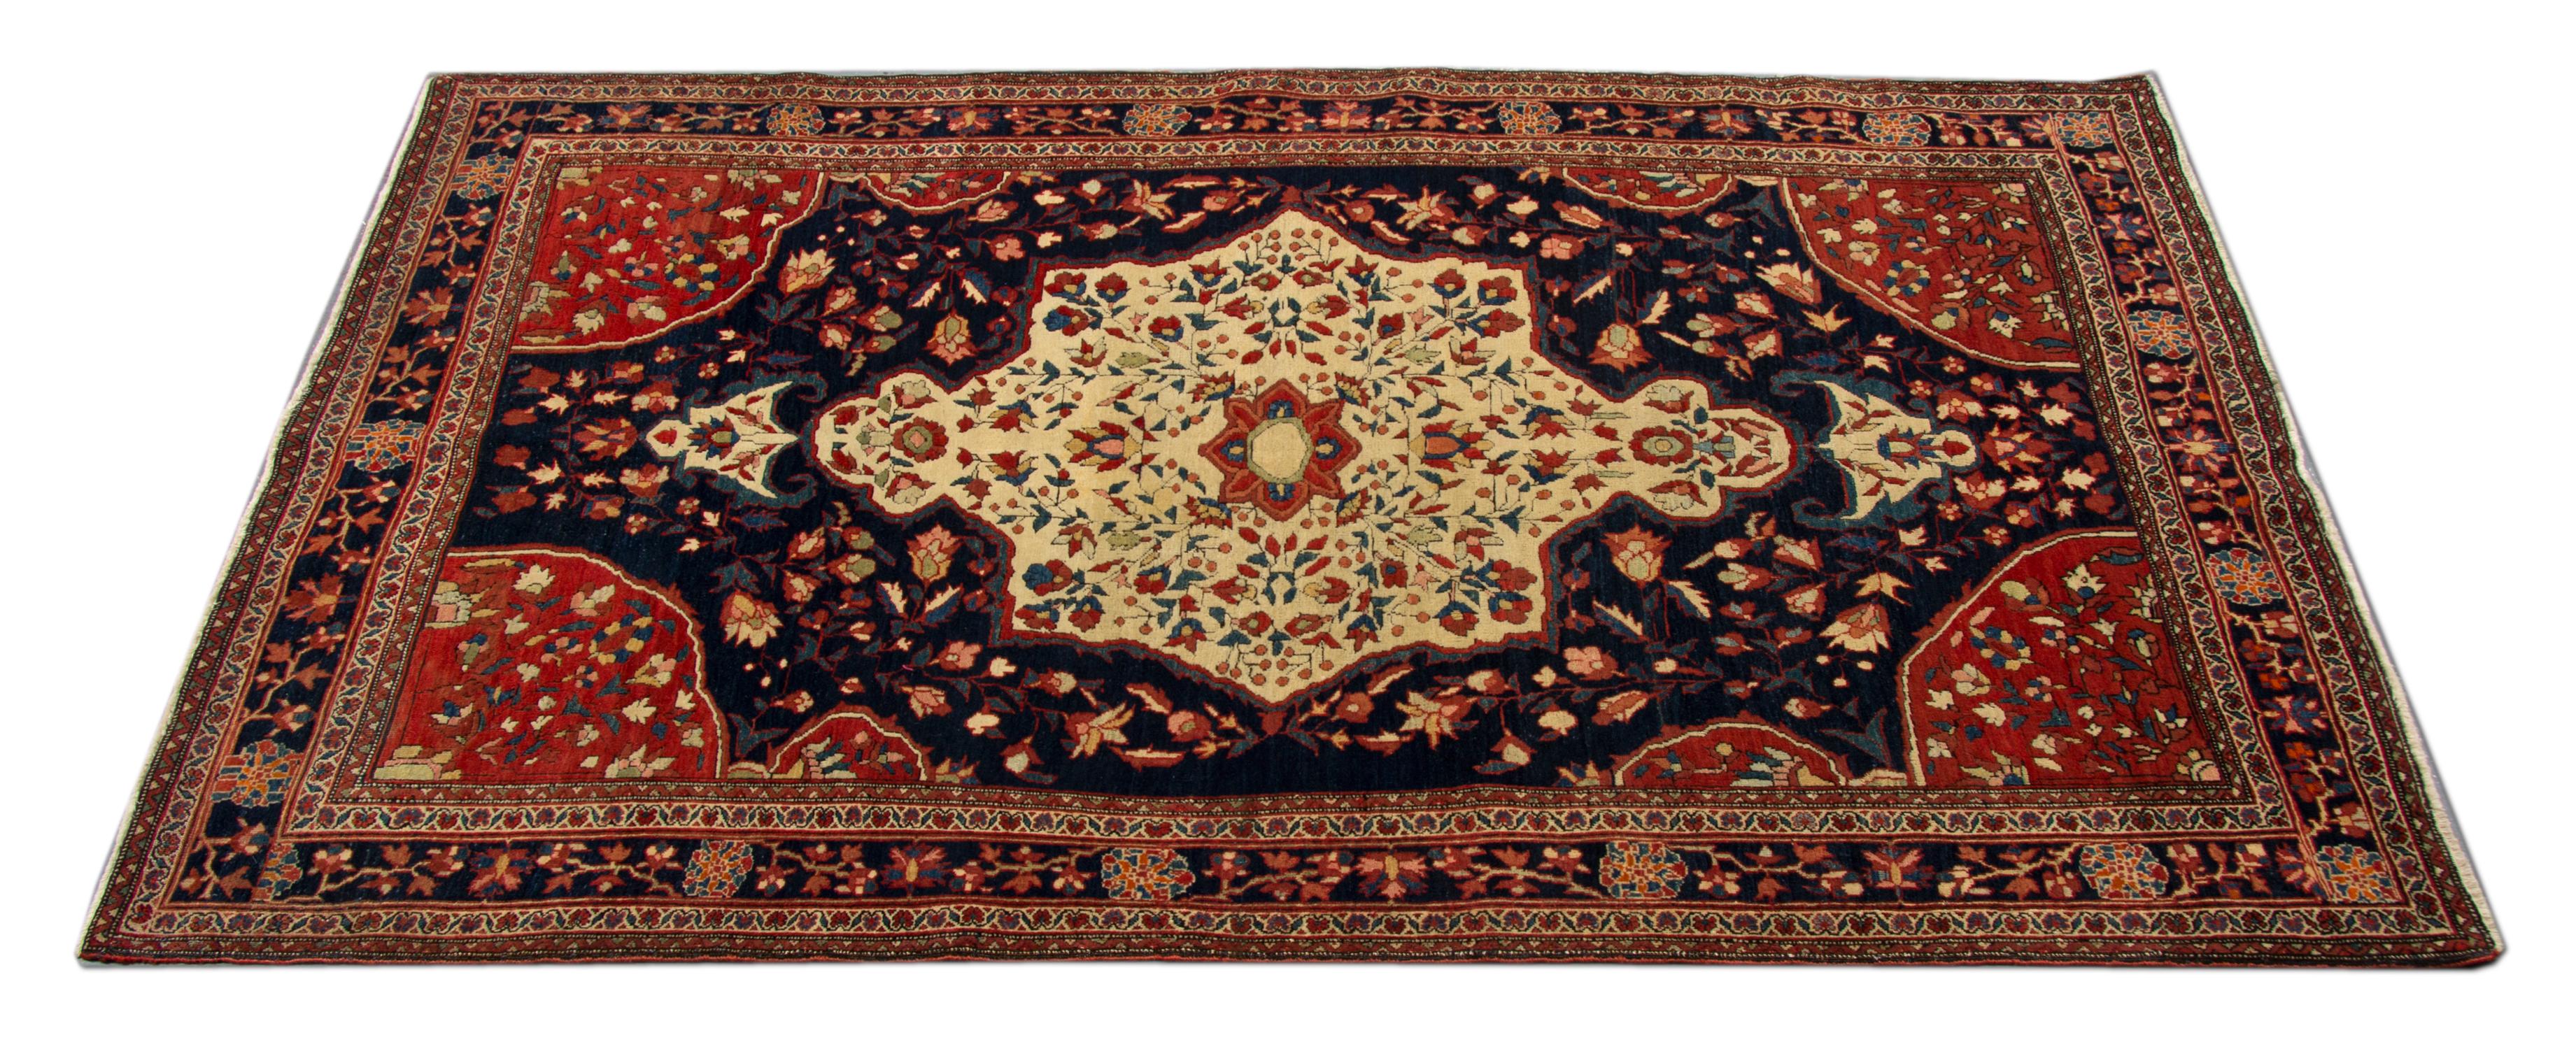 Handmade Carpet Antique Rug Traditional Red Blue Wool Area Rug In Excellent Condition For Sale In Hampshire, GB